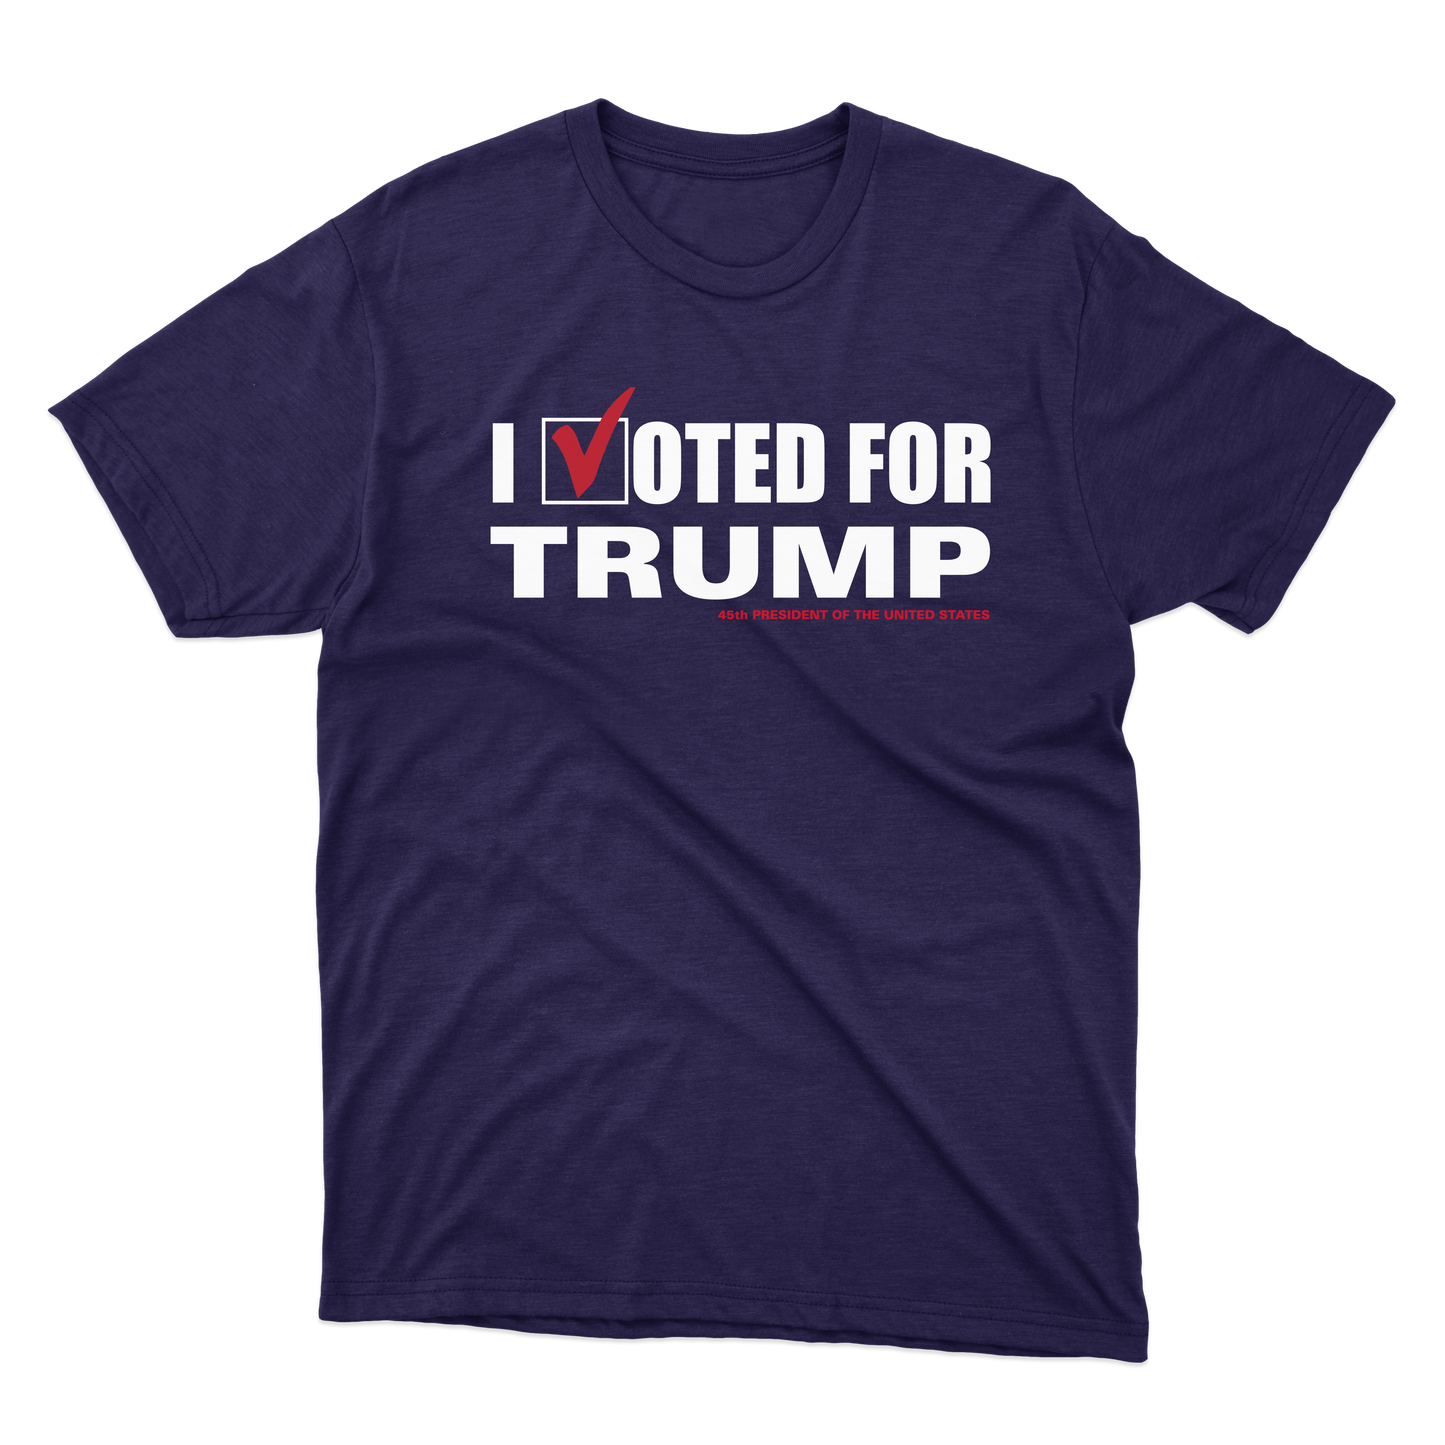 I Voted for Trump Shirt